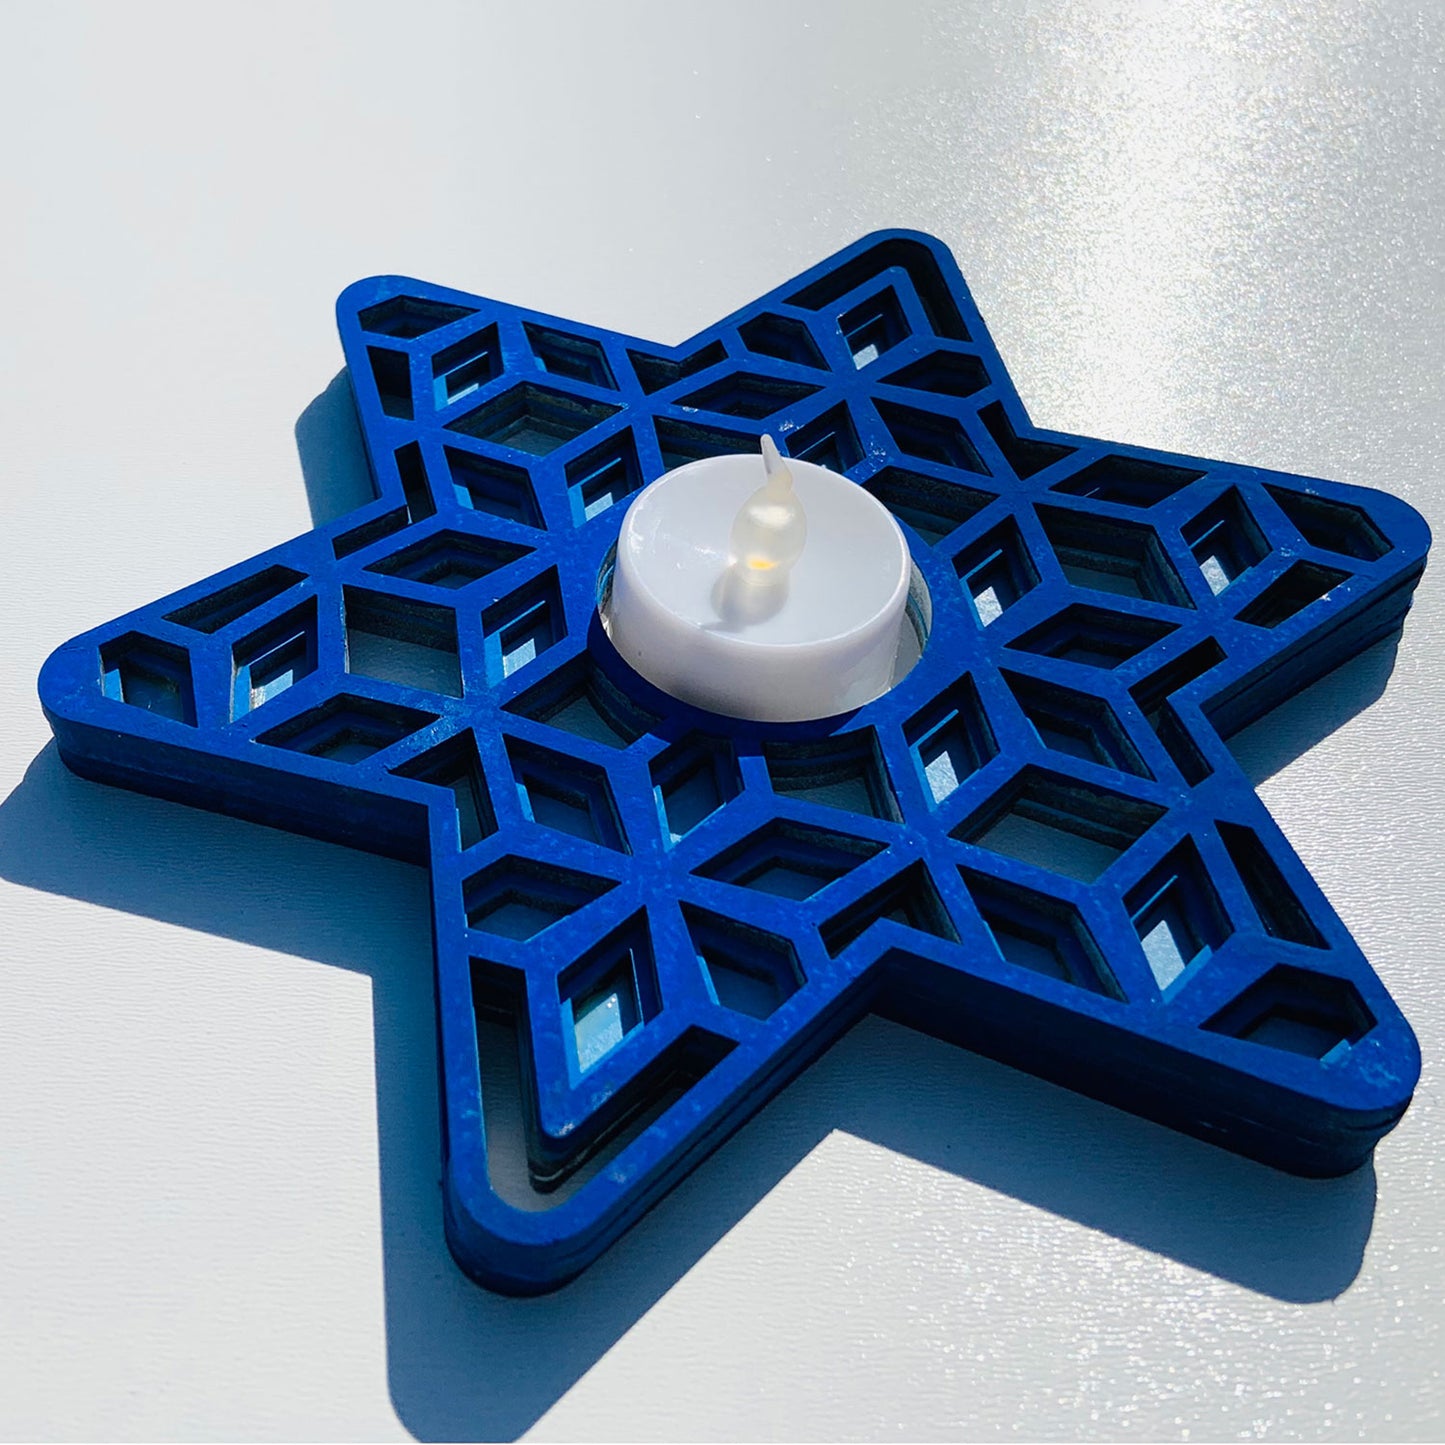 Layered Star Tea Light Candle Holder with Geometric Shapes